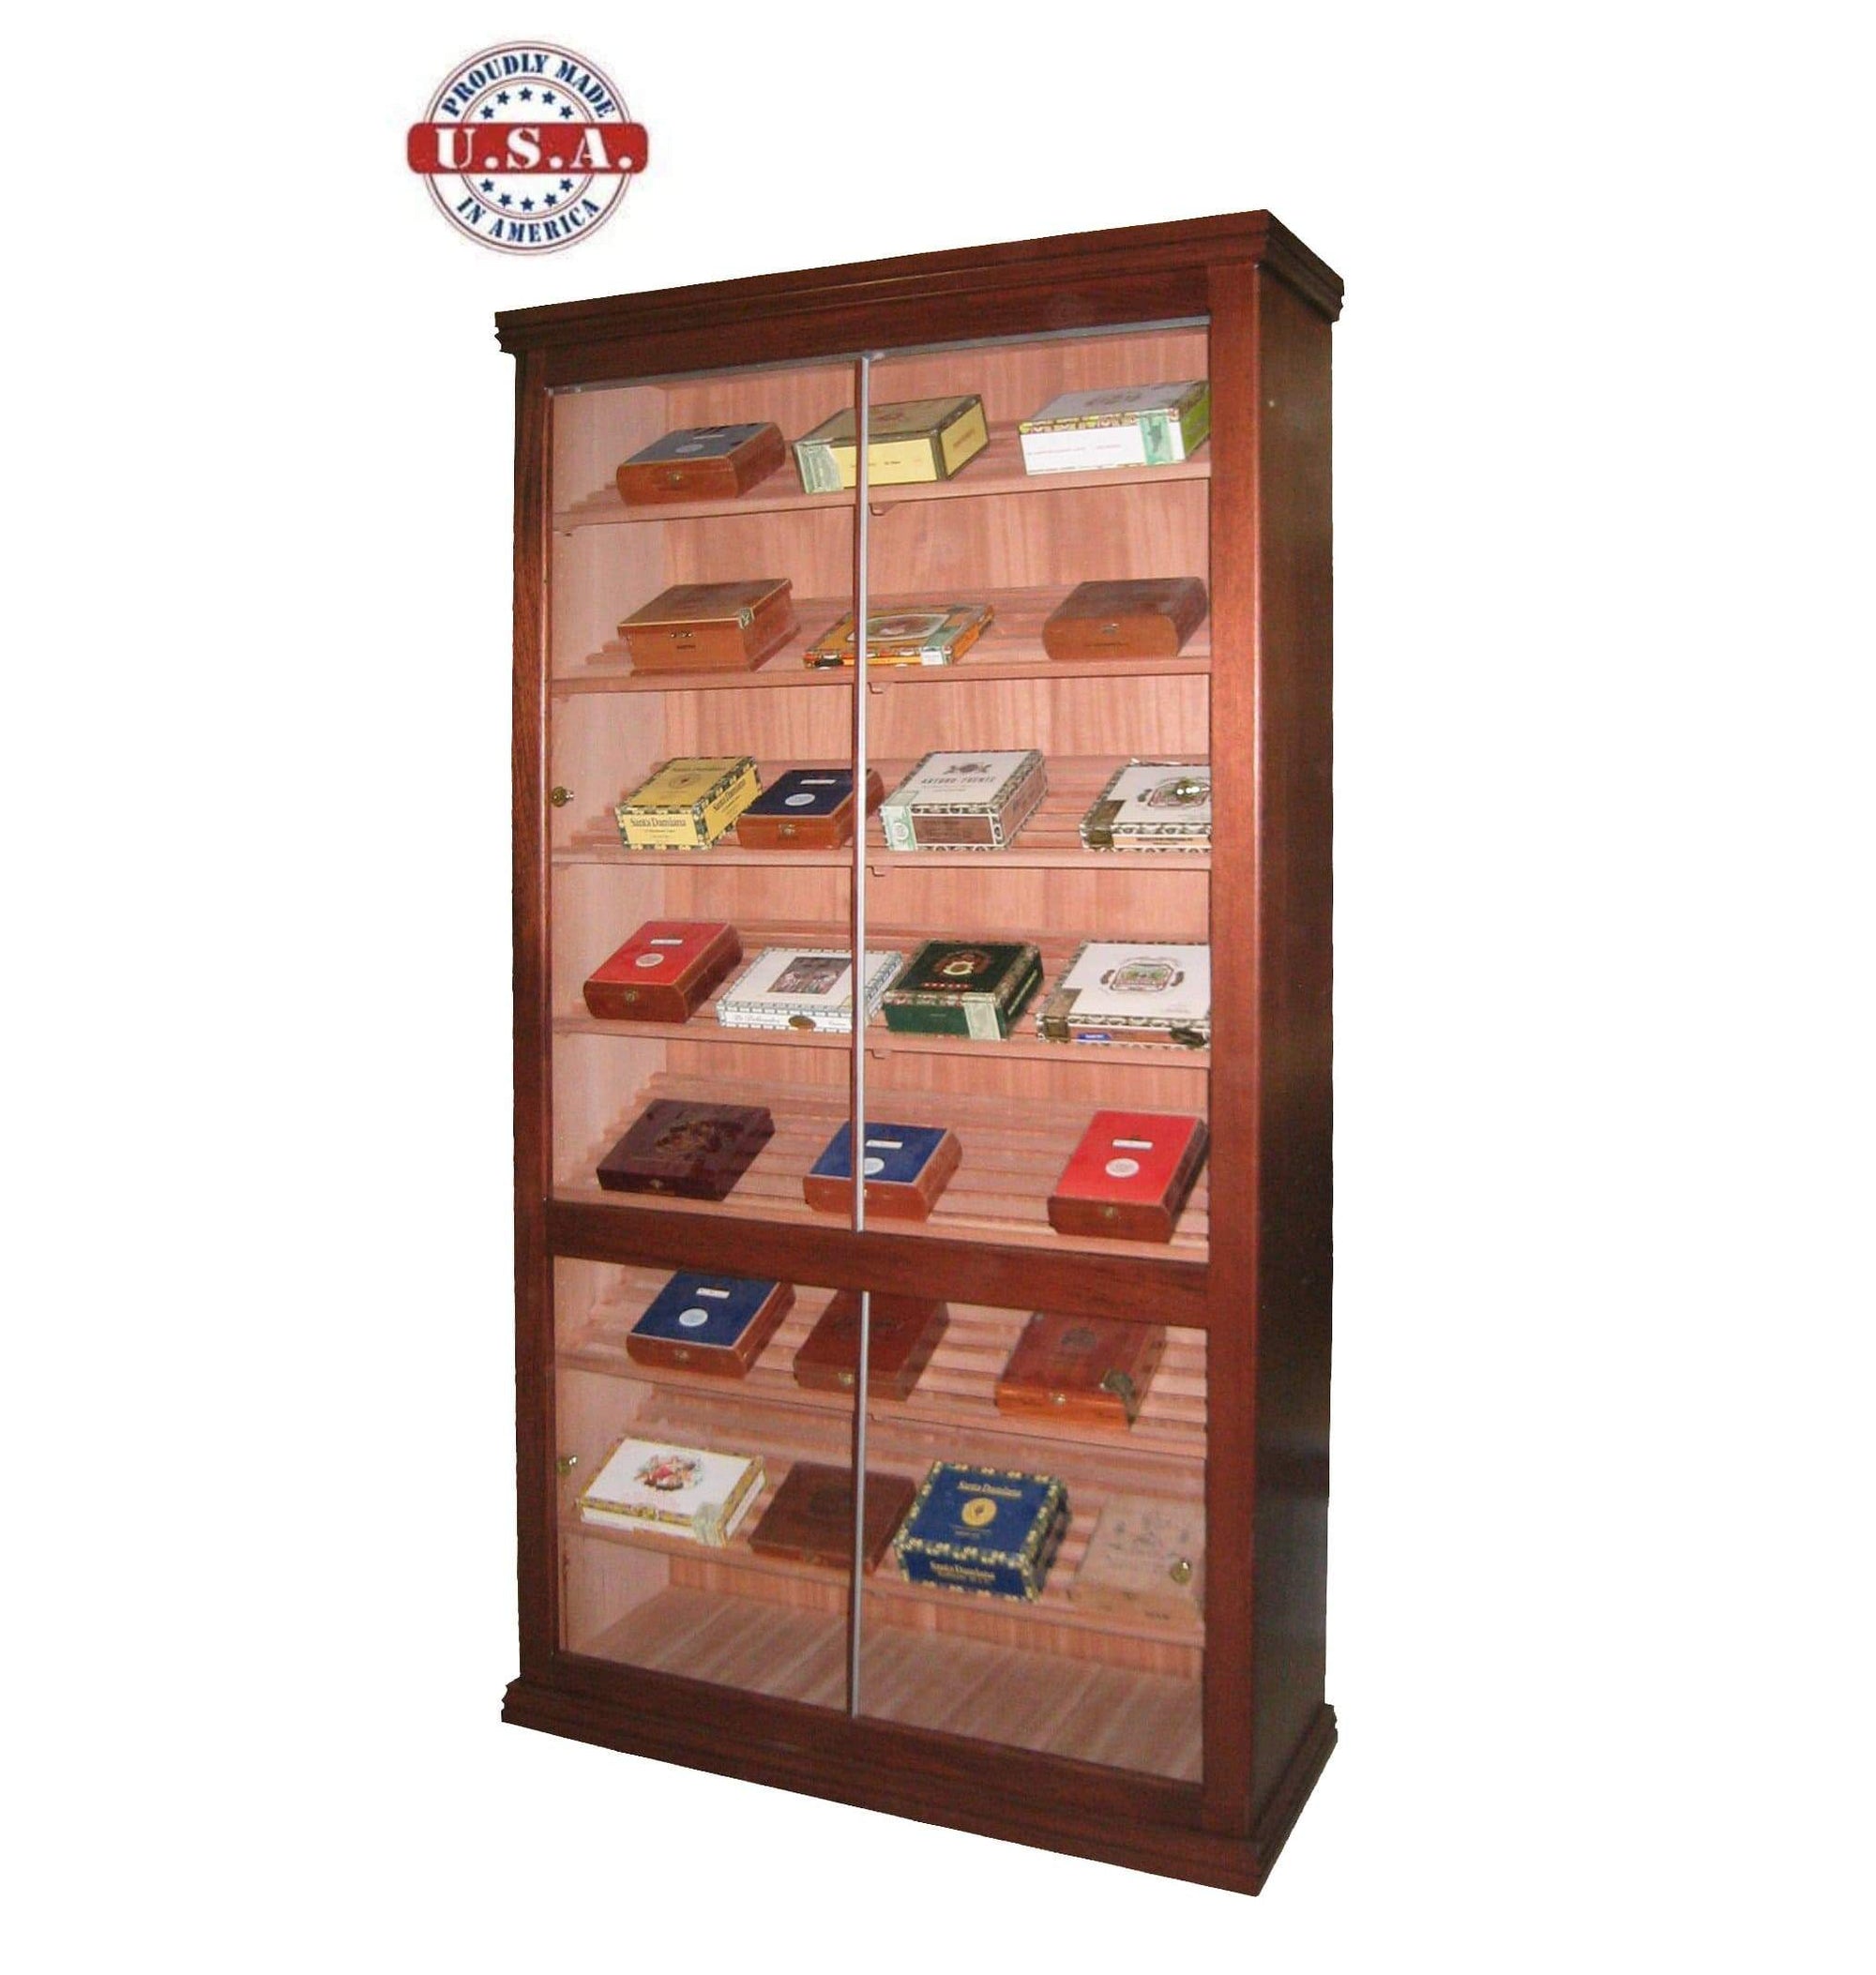 Elegant Bar HUMIDOR Model 4 Commercial Cigar Humidor Cabinet, one of the best humidor cabinets